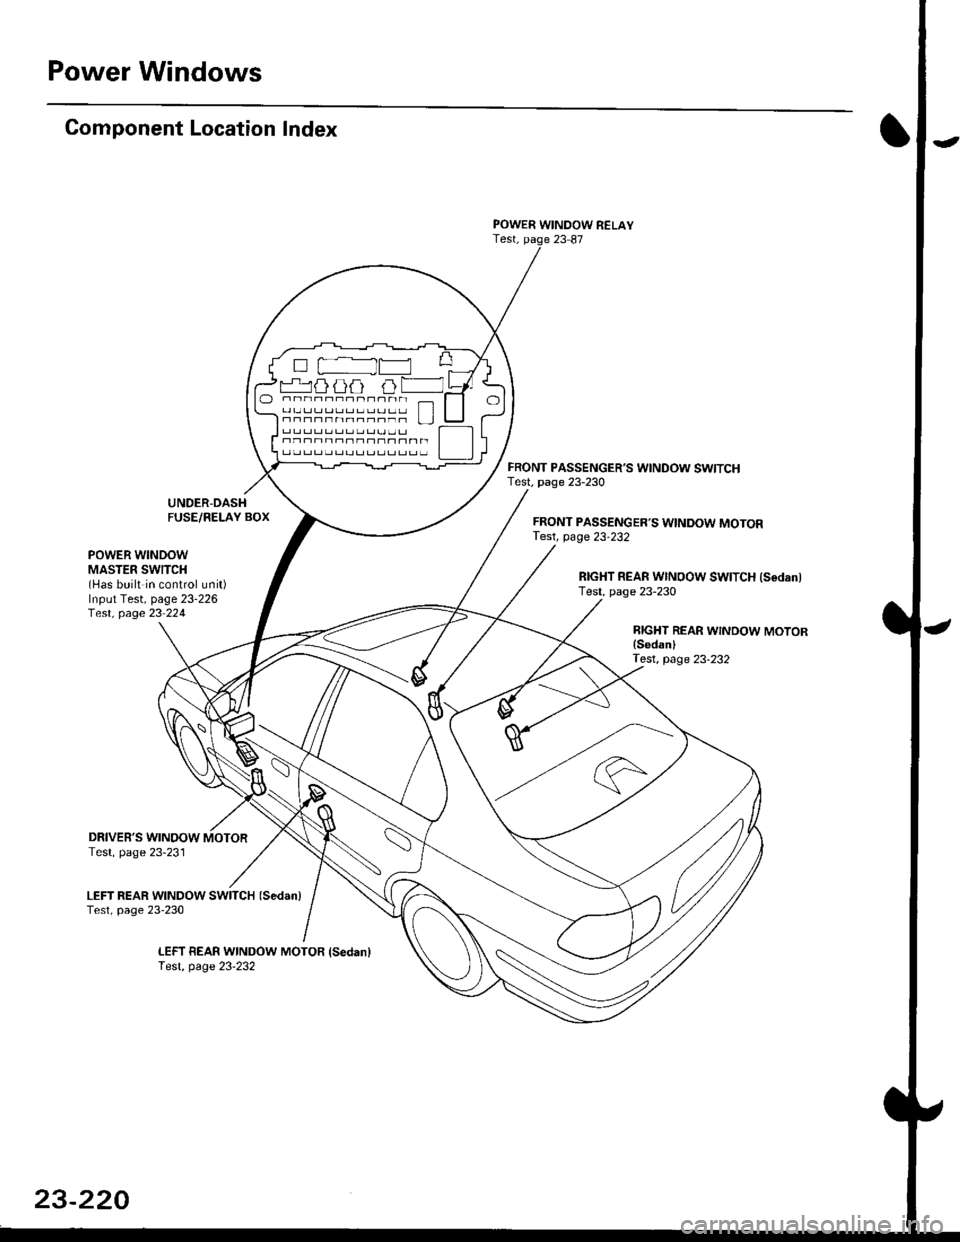 HONDA CIVIC 1996 6.G Owners Manual Power Windows
Gomponent Location Index
UNDER-DASHFUSE/RELAY BOX
POWER WINDOW RELAYTest, paqe 23 87
FRONT PASSENGERS WINDOW SWITCHTest. page 23-230
FRONT PASSENGERS WINDOW MOTORTest, page 23-232
POWE